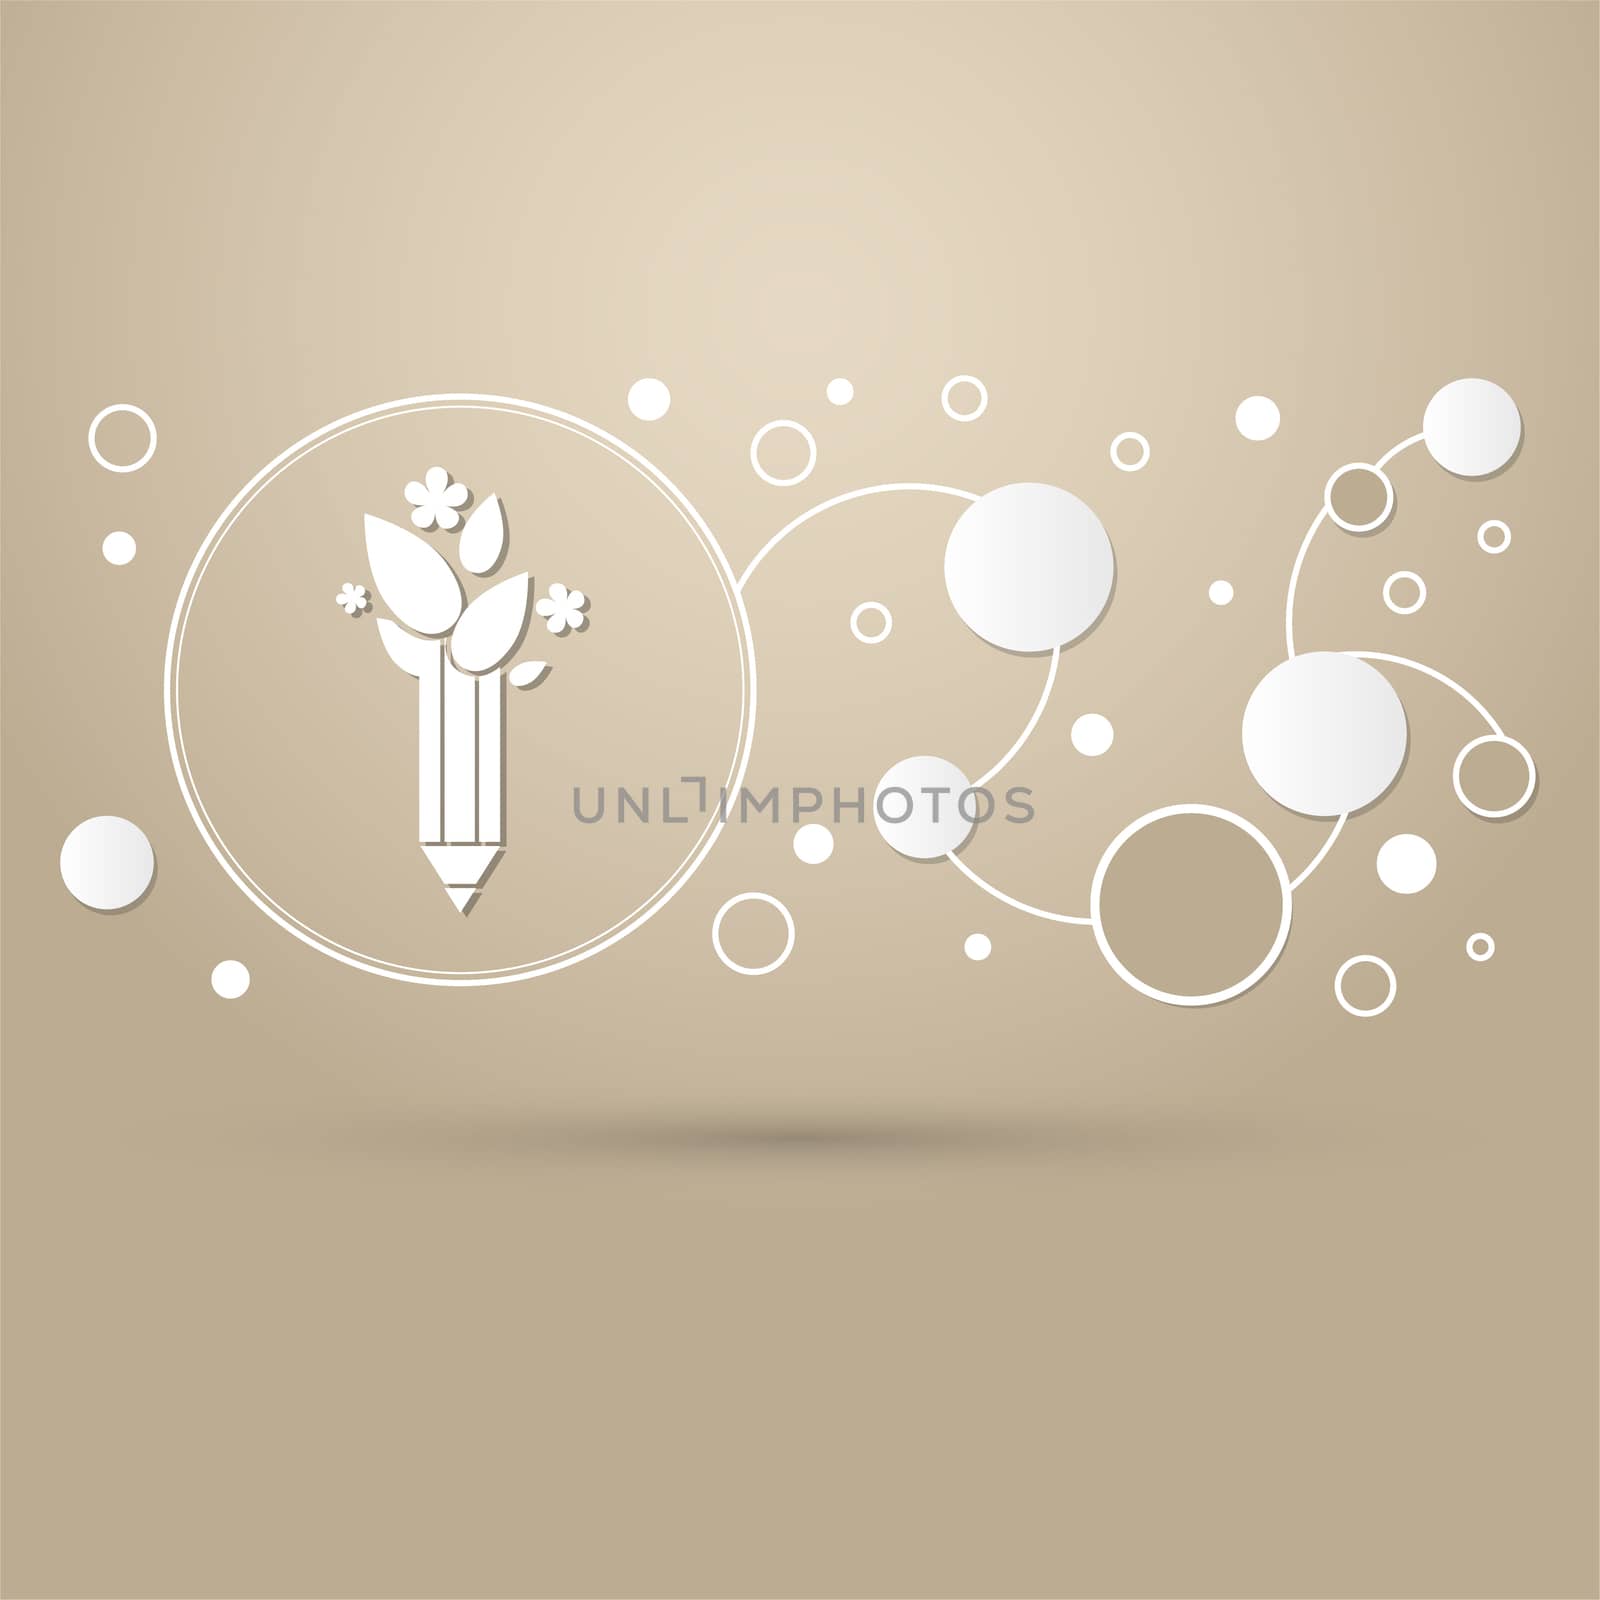 Ecology pencil, eco pen icon on a brown background with elegant style and modern design infographic. illustration